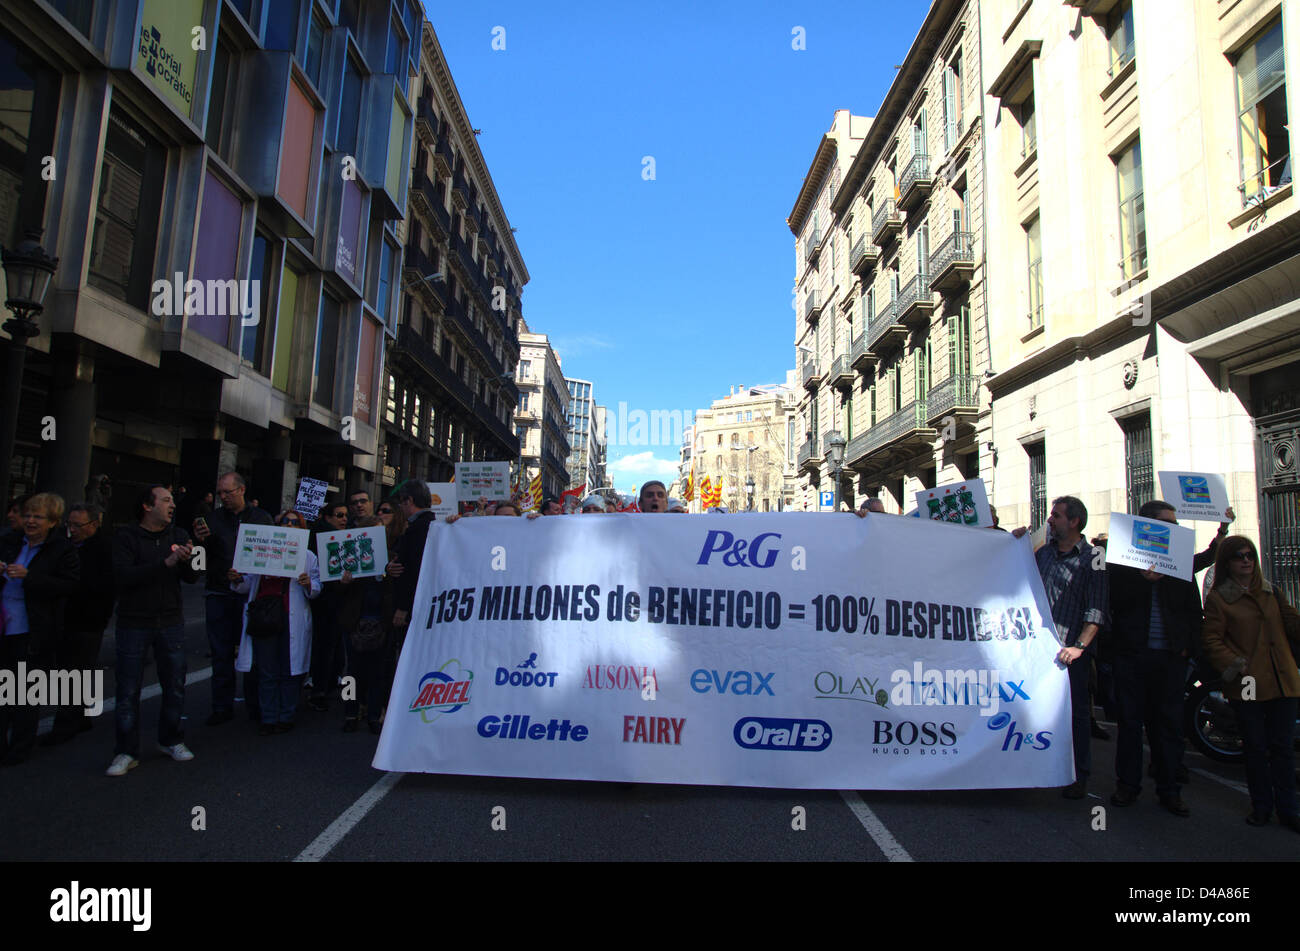 Barcelona, Spain. 10th March, 2013. Protests against Spanish and Catalonian government welfare cuts due to the economic crisis and the imposition of austerity as the remedy to resolve the crisis. Sign against Protect & Gamble layoffs. Stock Photo